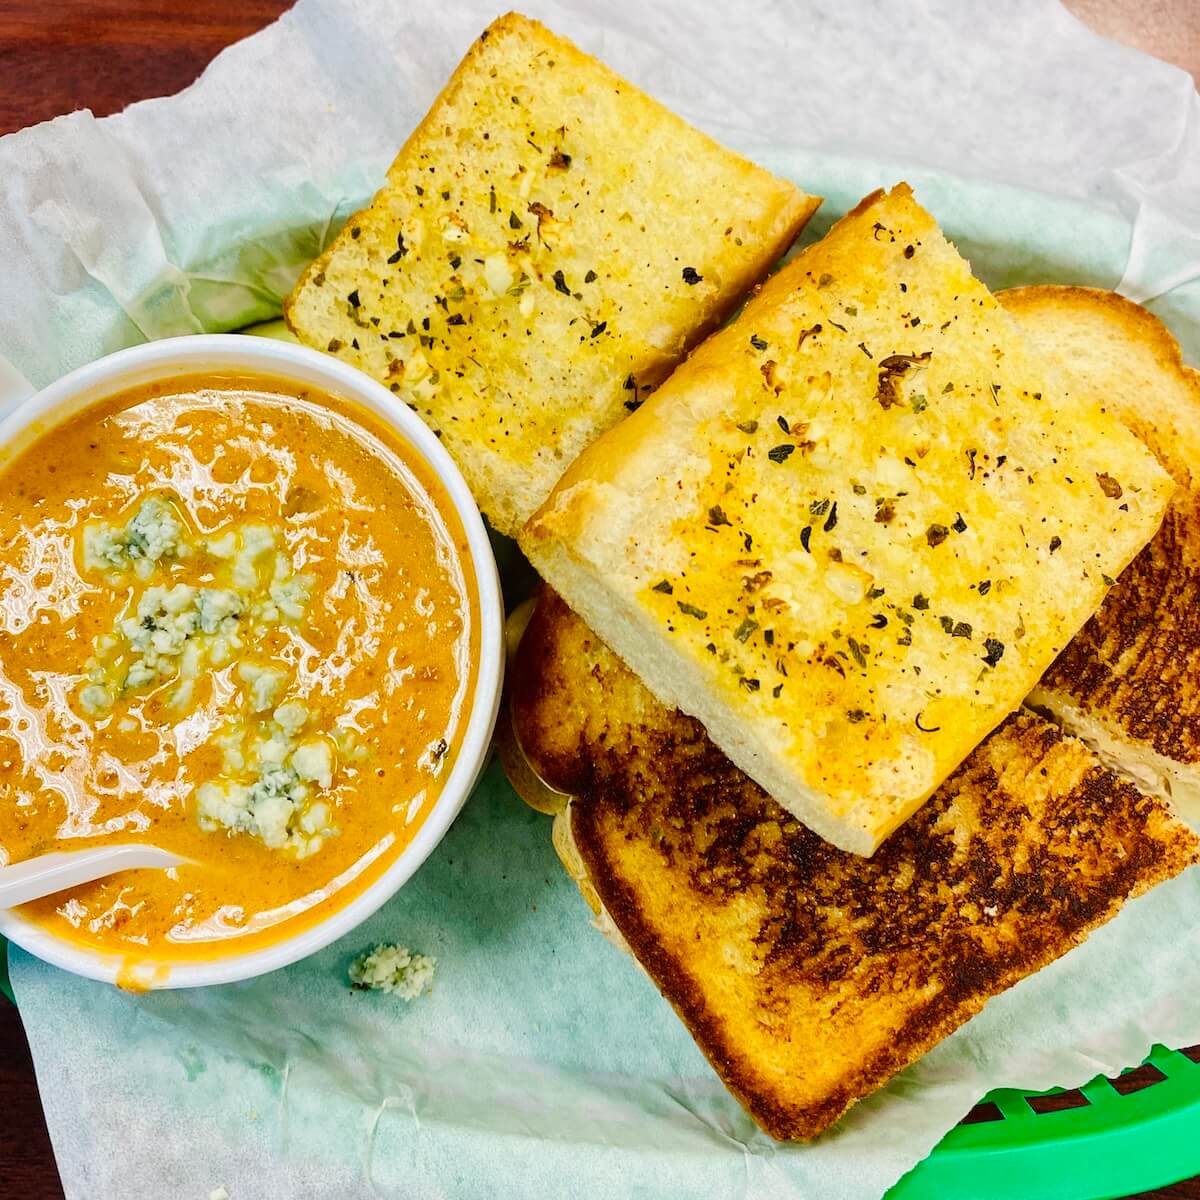 Tomato bisque and toasted bread